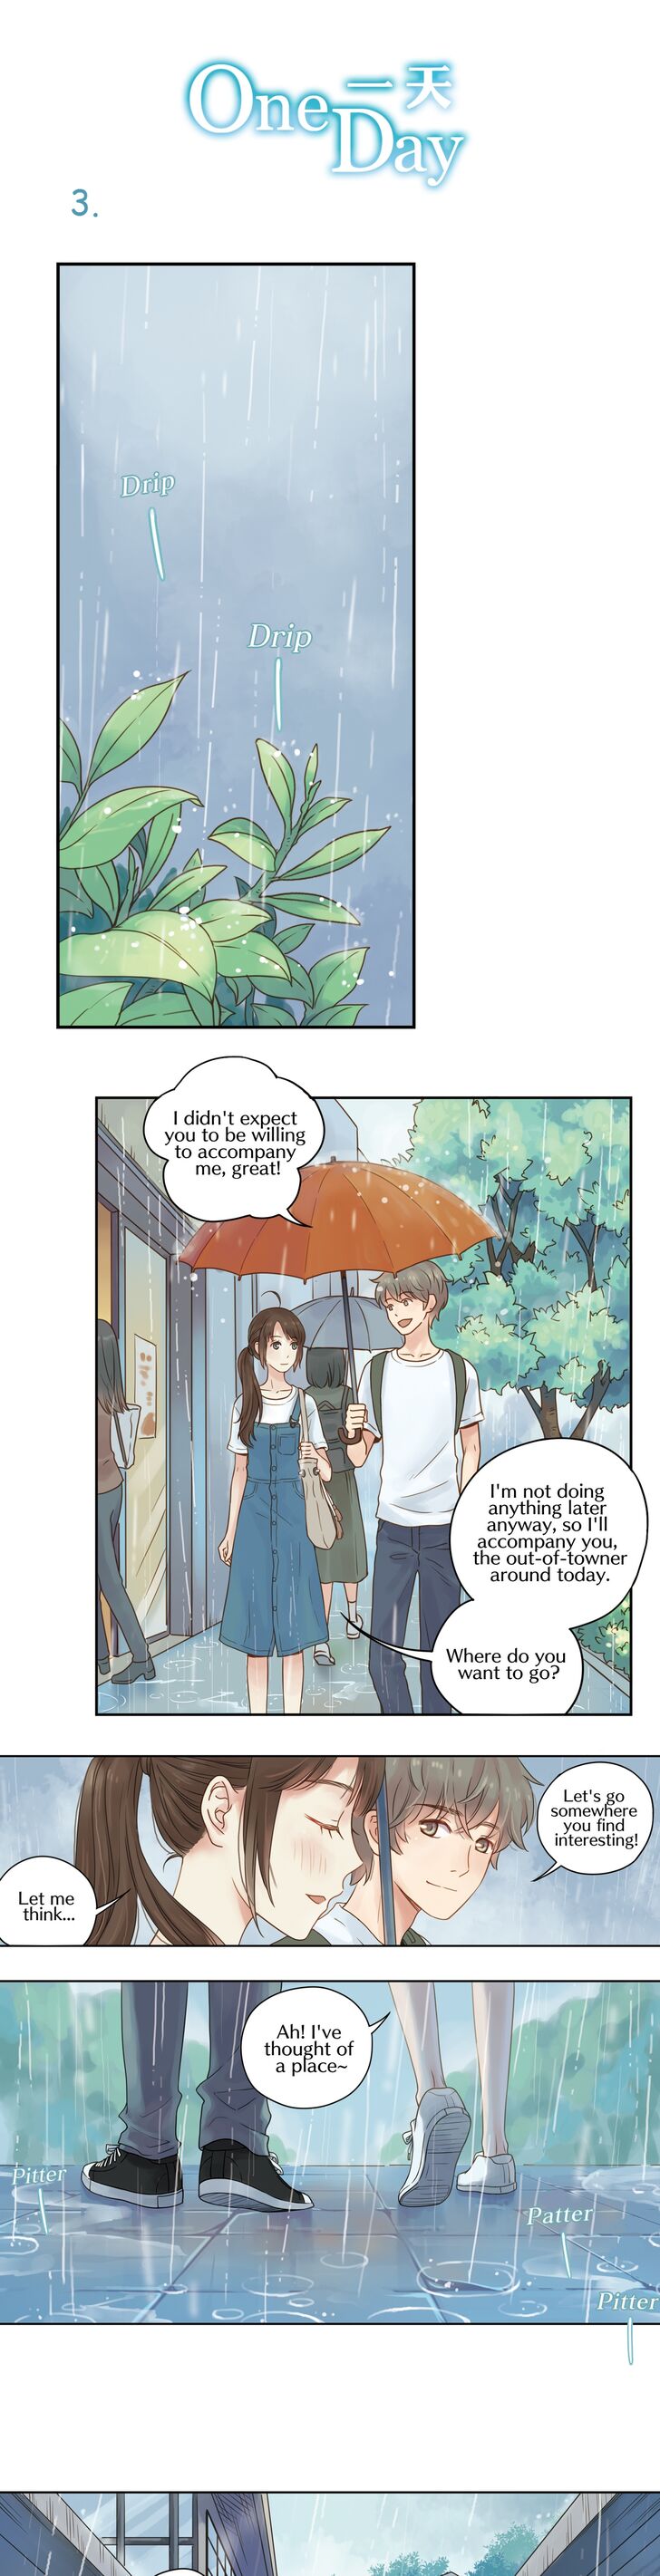 One Day(Huo Mo) - chapter 3 - #1